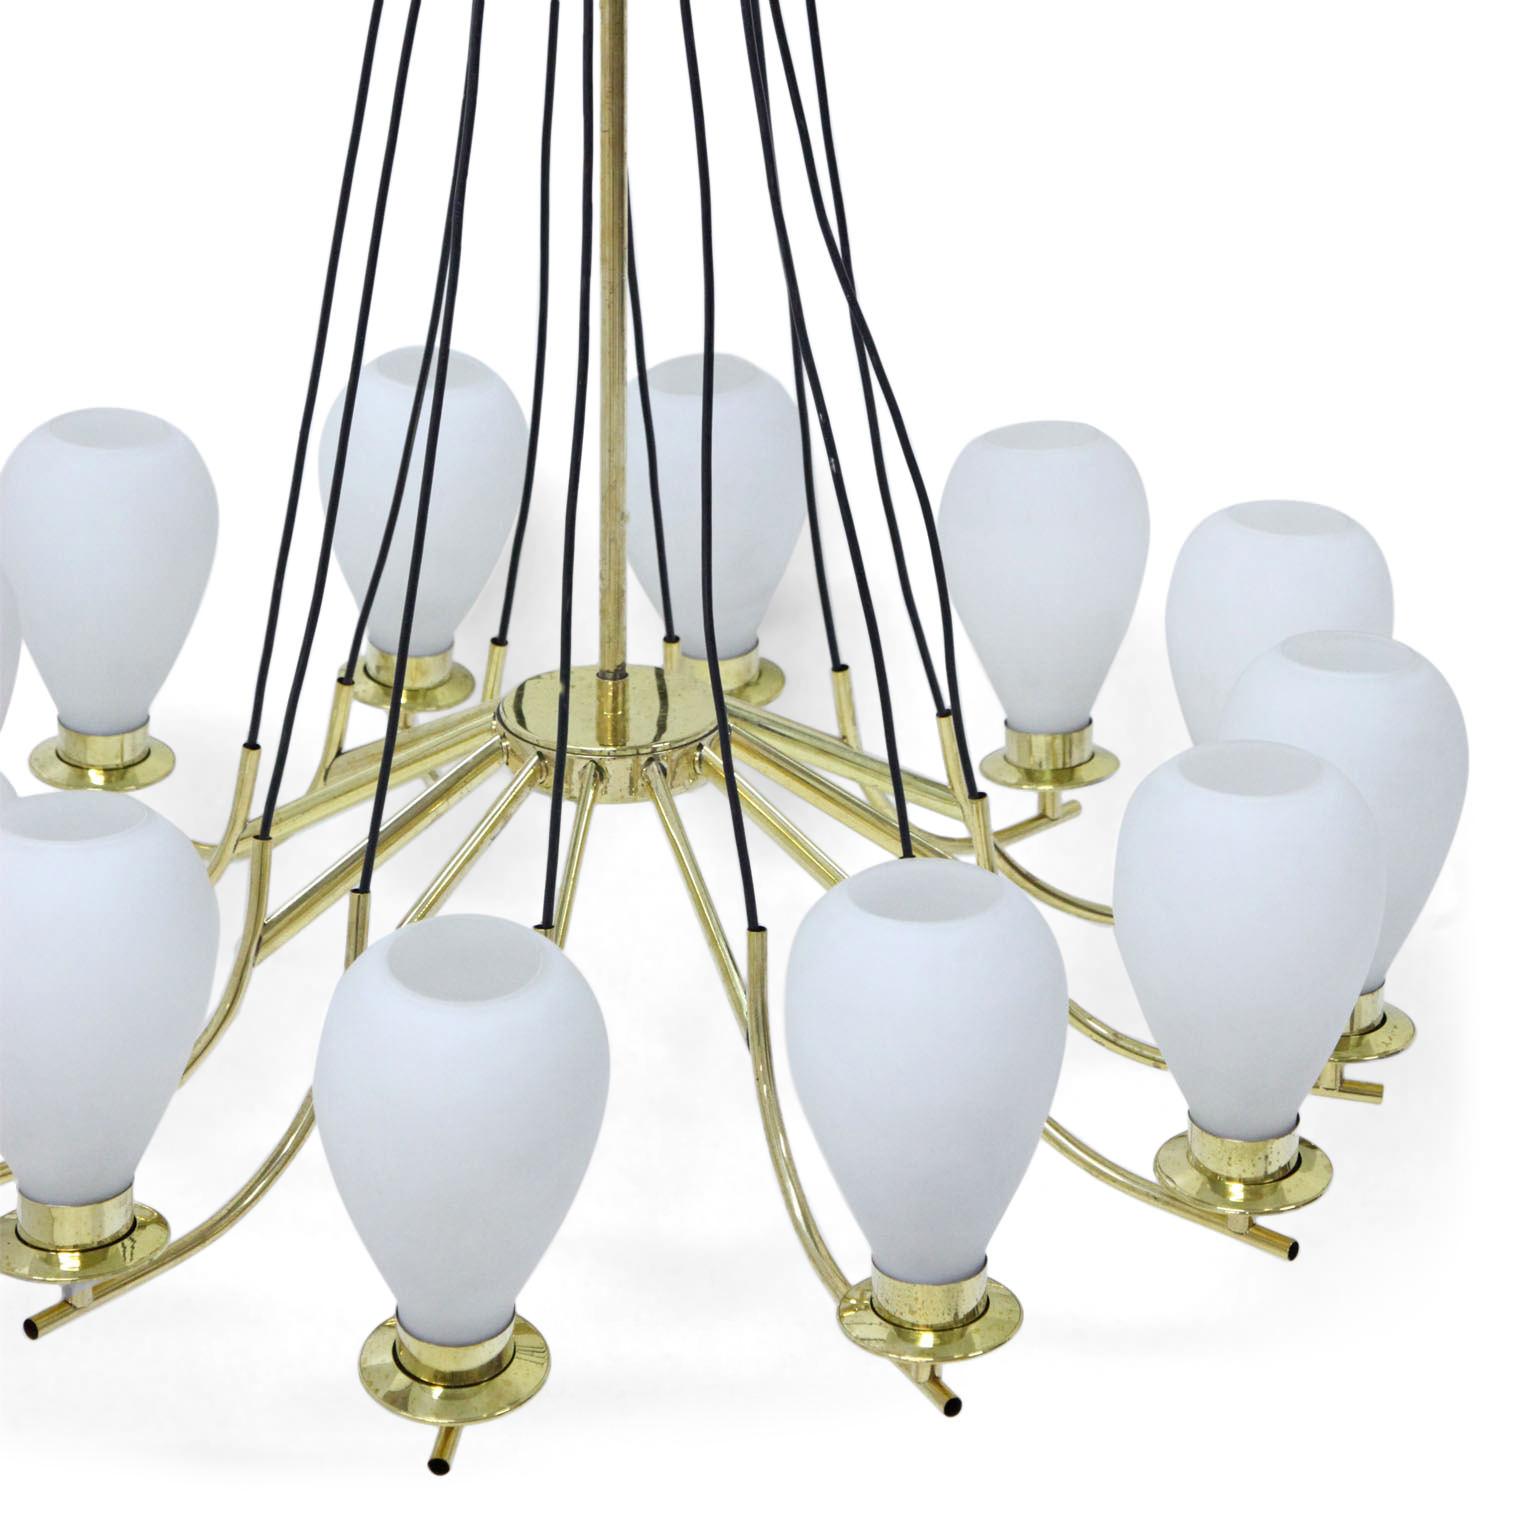 Large twelve-arm chandelier out of brass with cone-shaped lampshades out of opaque glass. The black wiring meets at the height of the ceiling mount. 

For the electrification we assume no liability and no warranty.